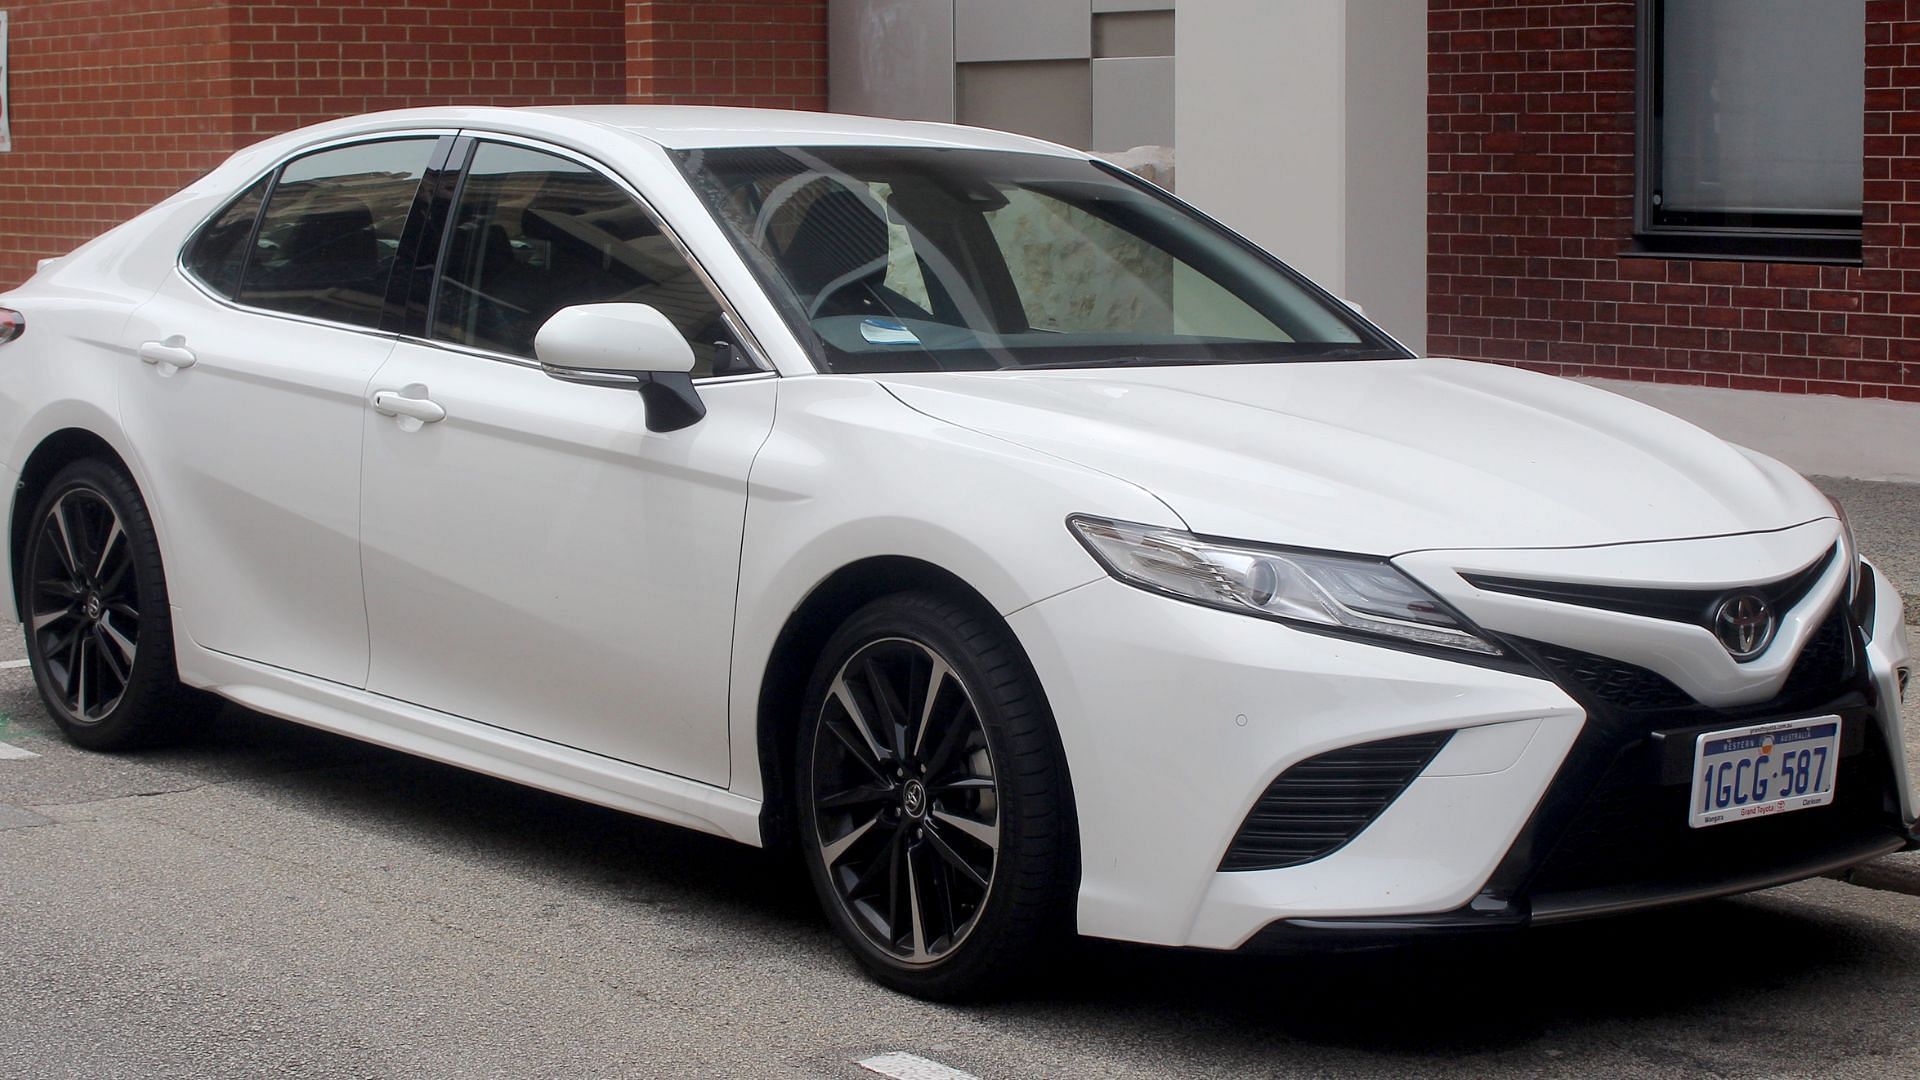 The Toyota Camry is a great choice for regular cars in GTA 6 (Image via Wikipedia)